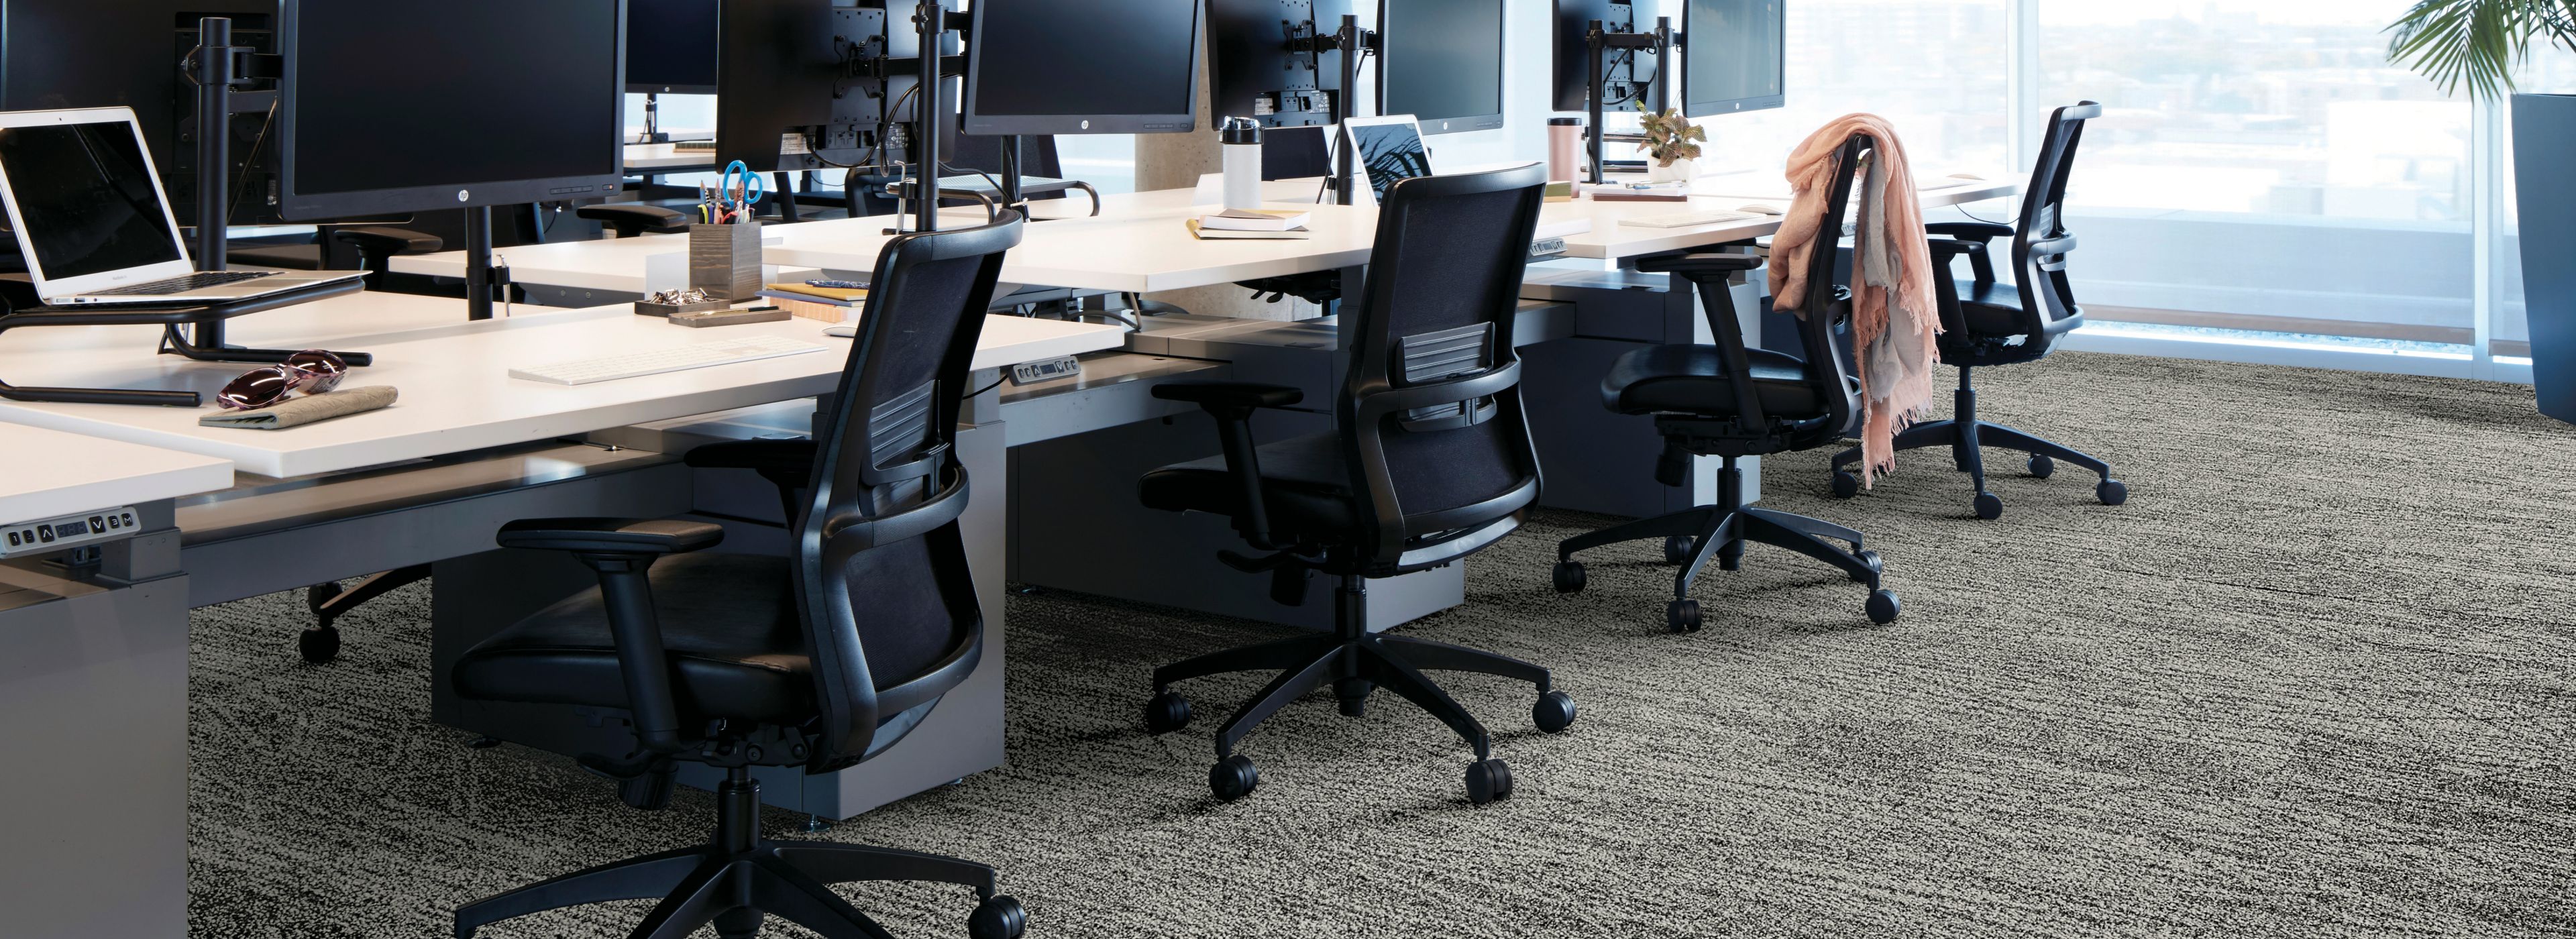 Interface Open Air 409 plank carpet tile with open work stations and cardigan draped over office chair imagen número 1